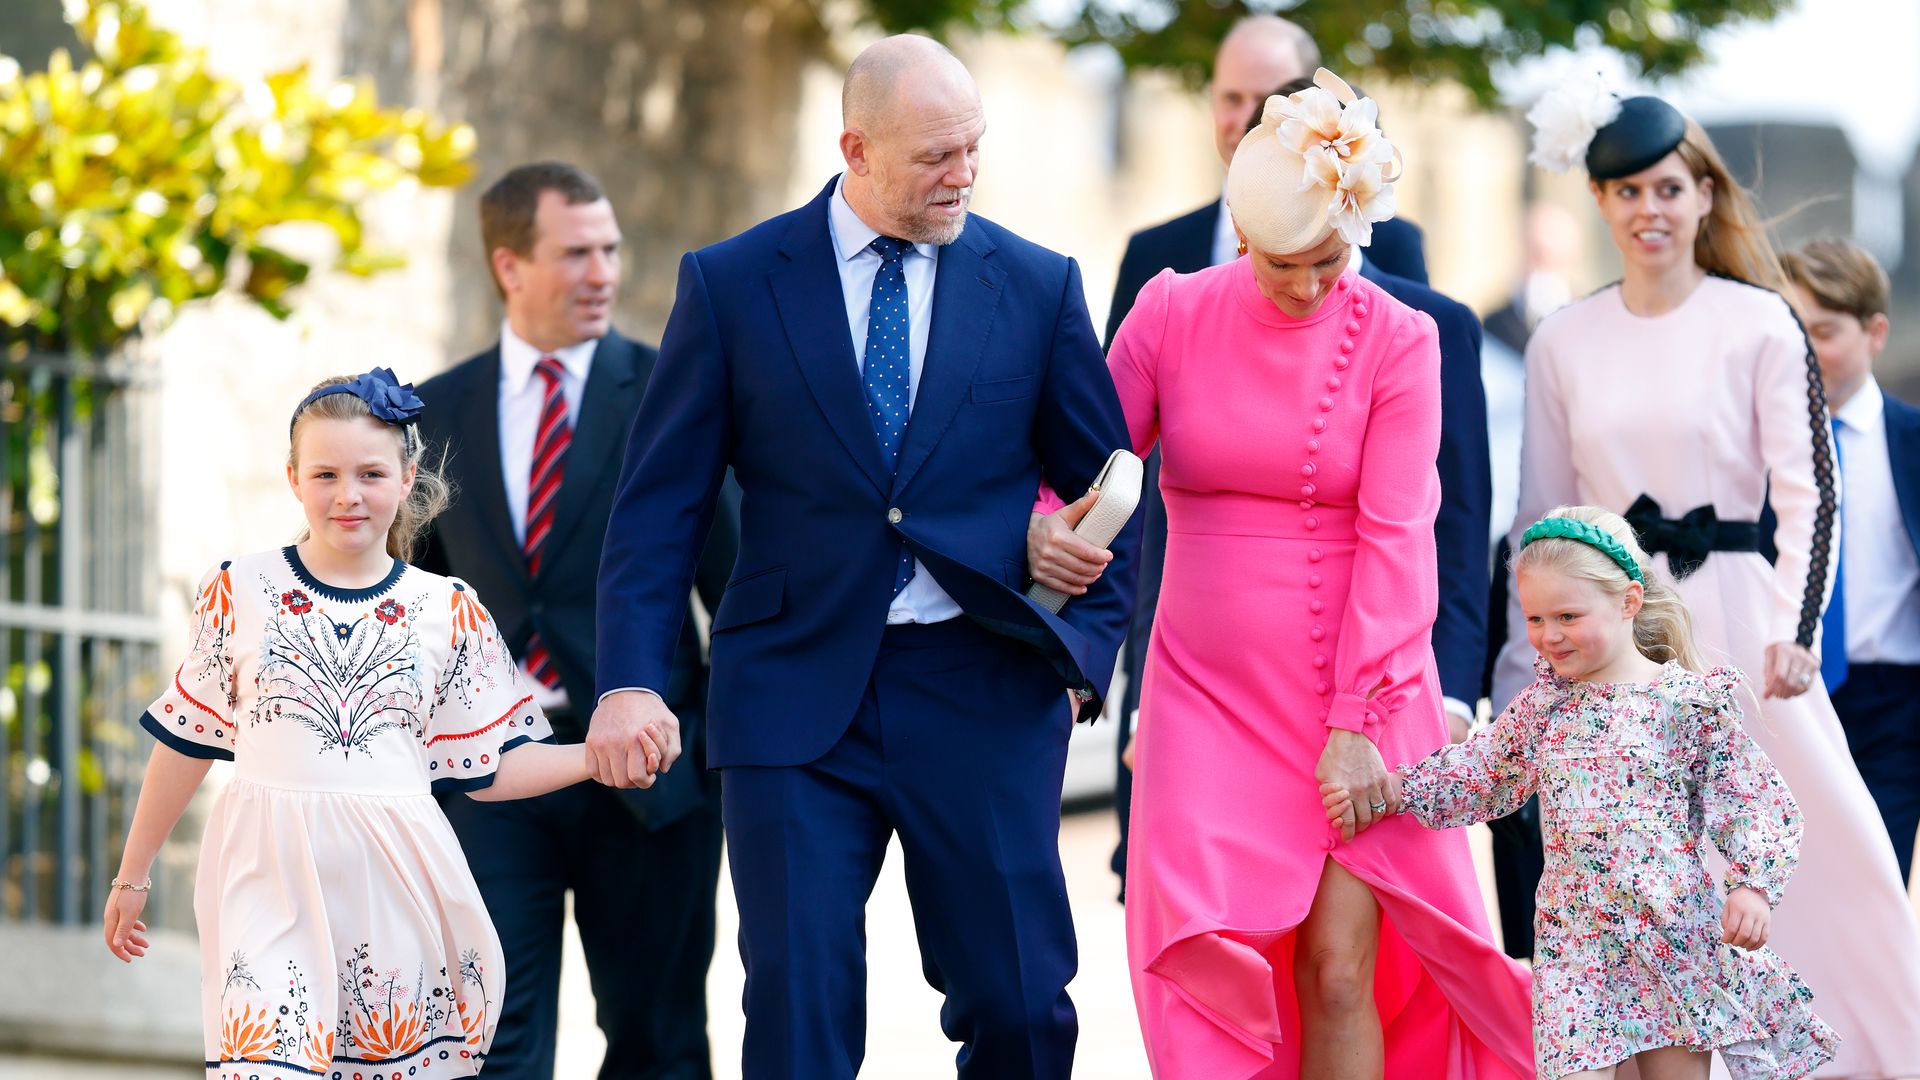 Mia joined sister Lena, parents Mike and Zara Tindall and senior royals at the traditional Easter service